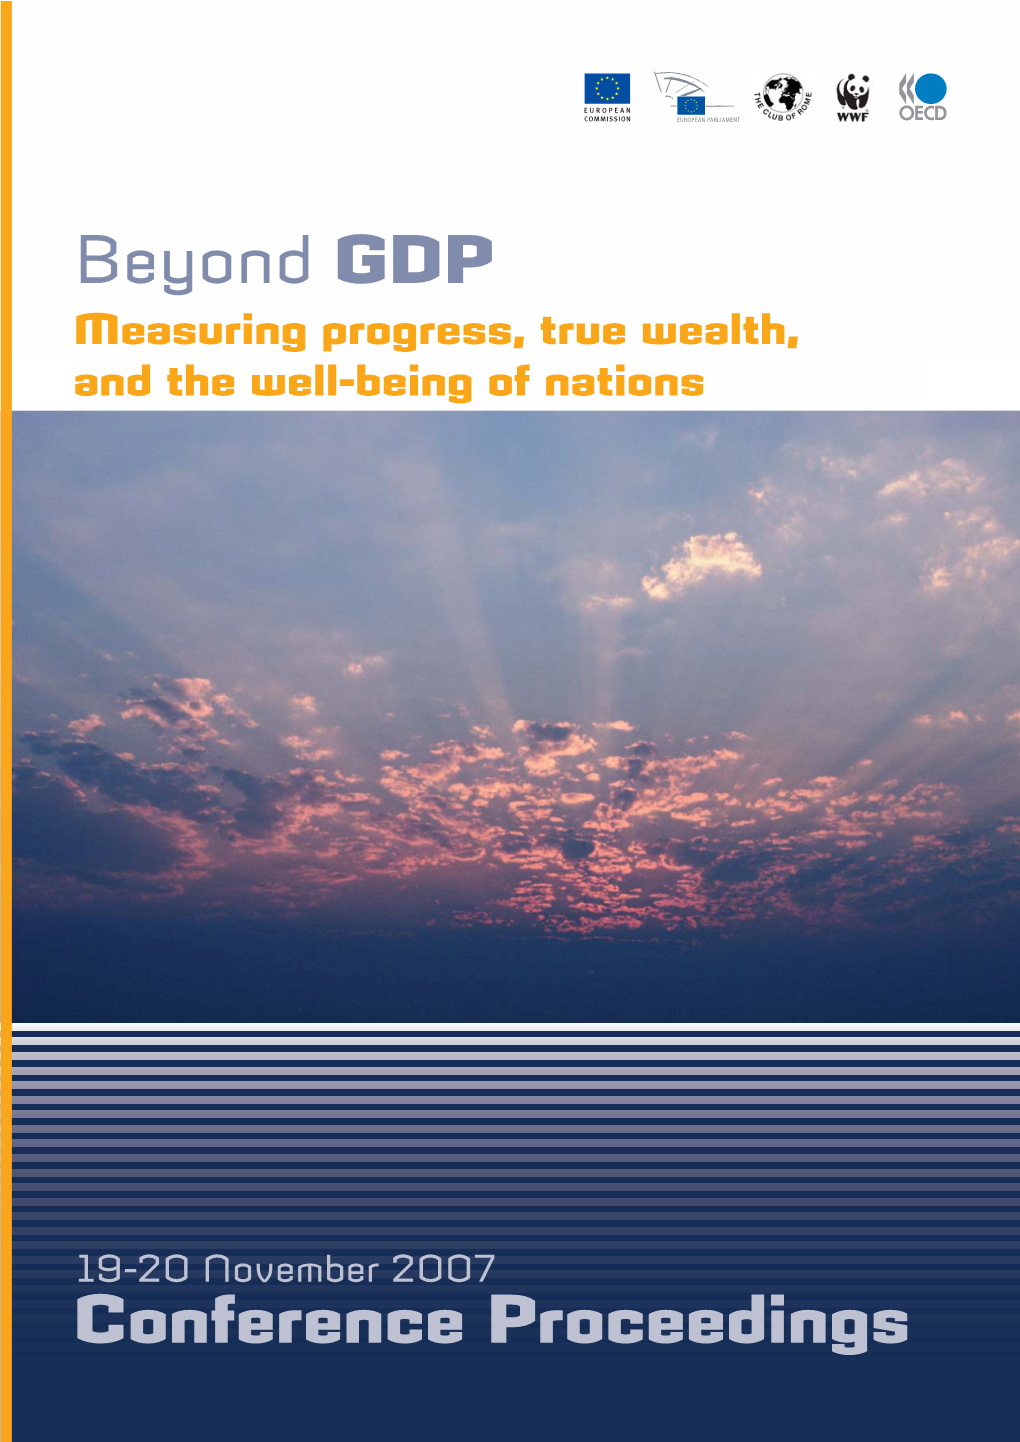 Beyond GDP Conference Proceedings